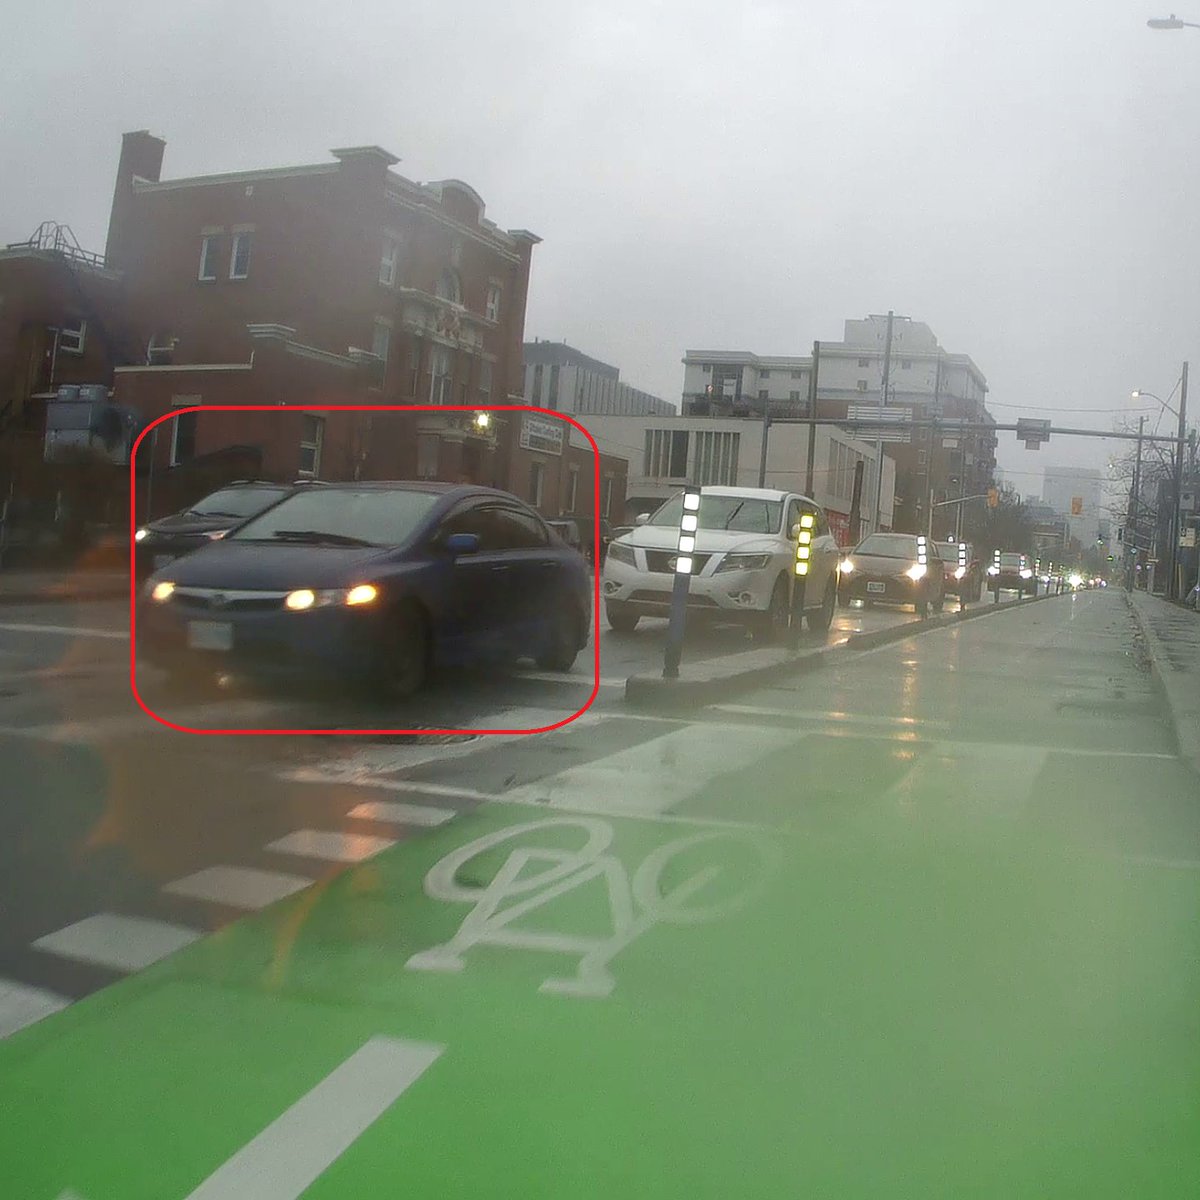 This driver is signaling a turn to go the wrong way on Catherine St. Other drivers honked, but they went and did it anyway. #autowa (rear camera didn't catch it due to spray from water on the ground).